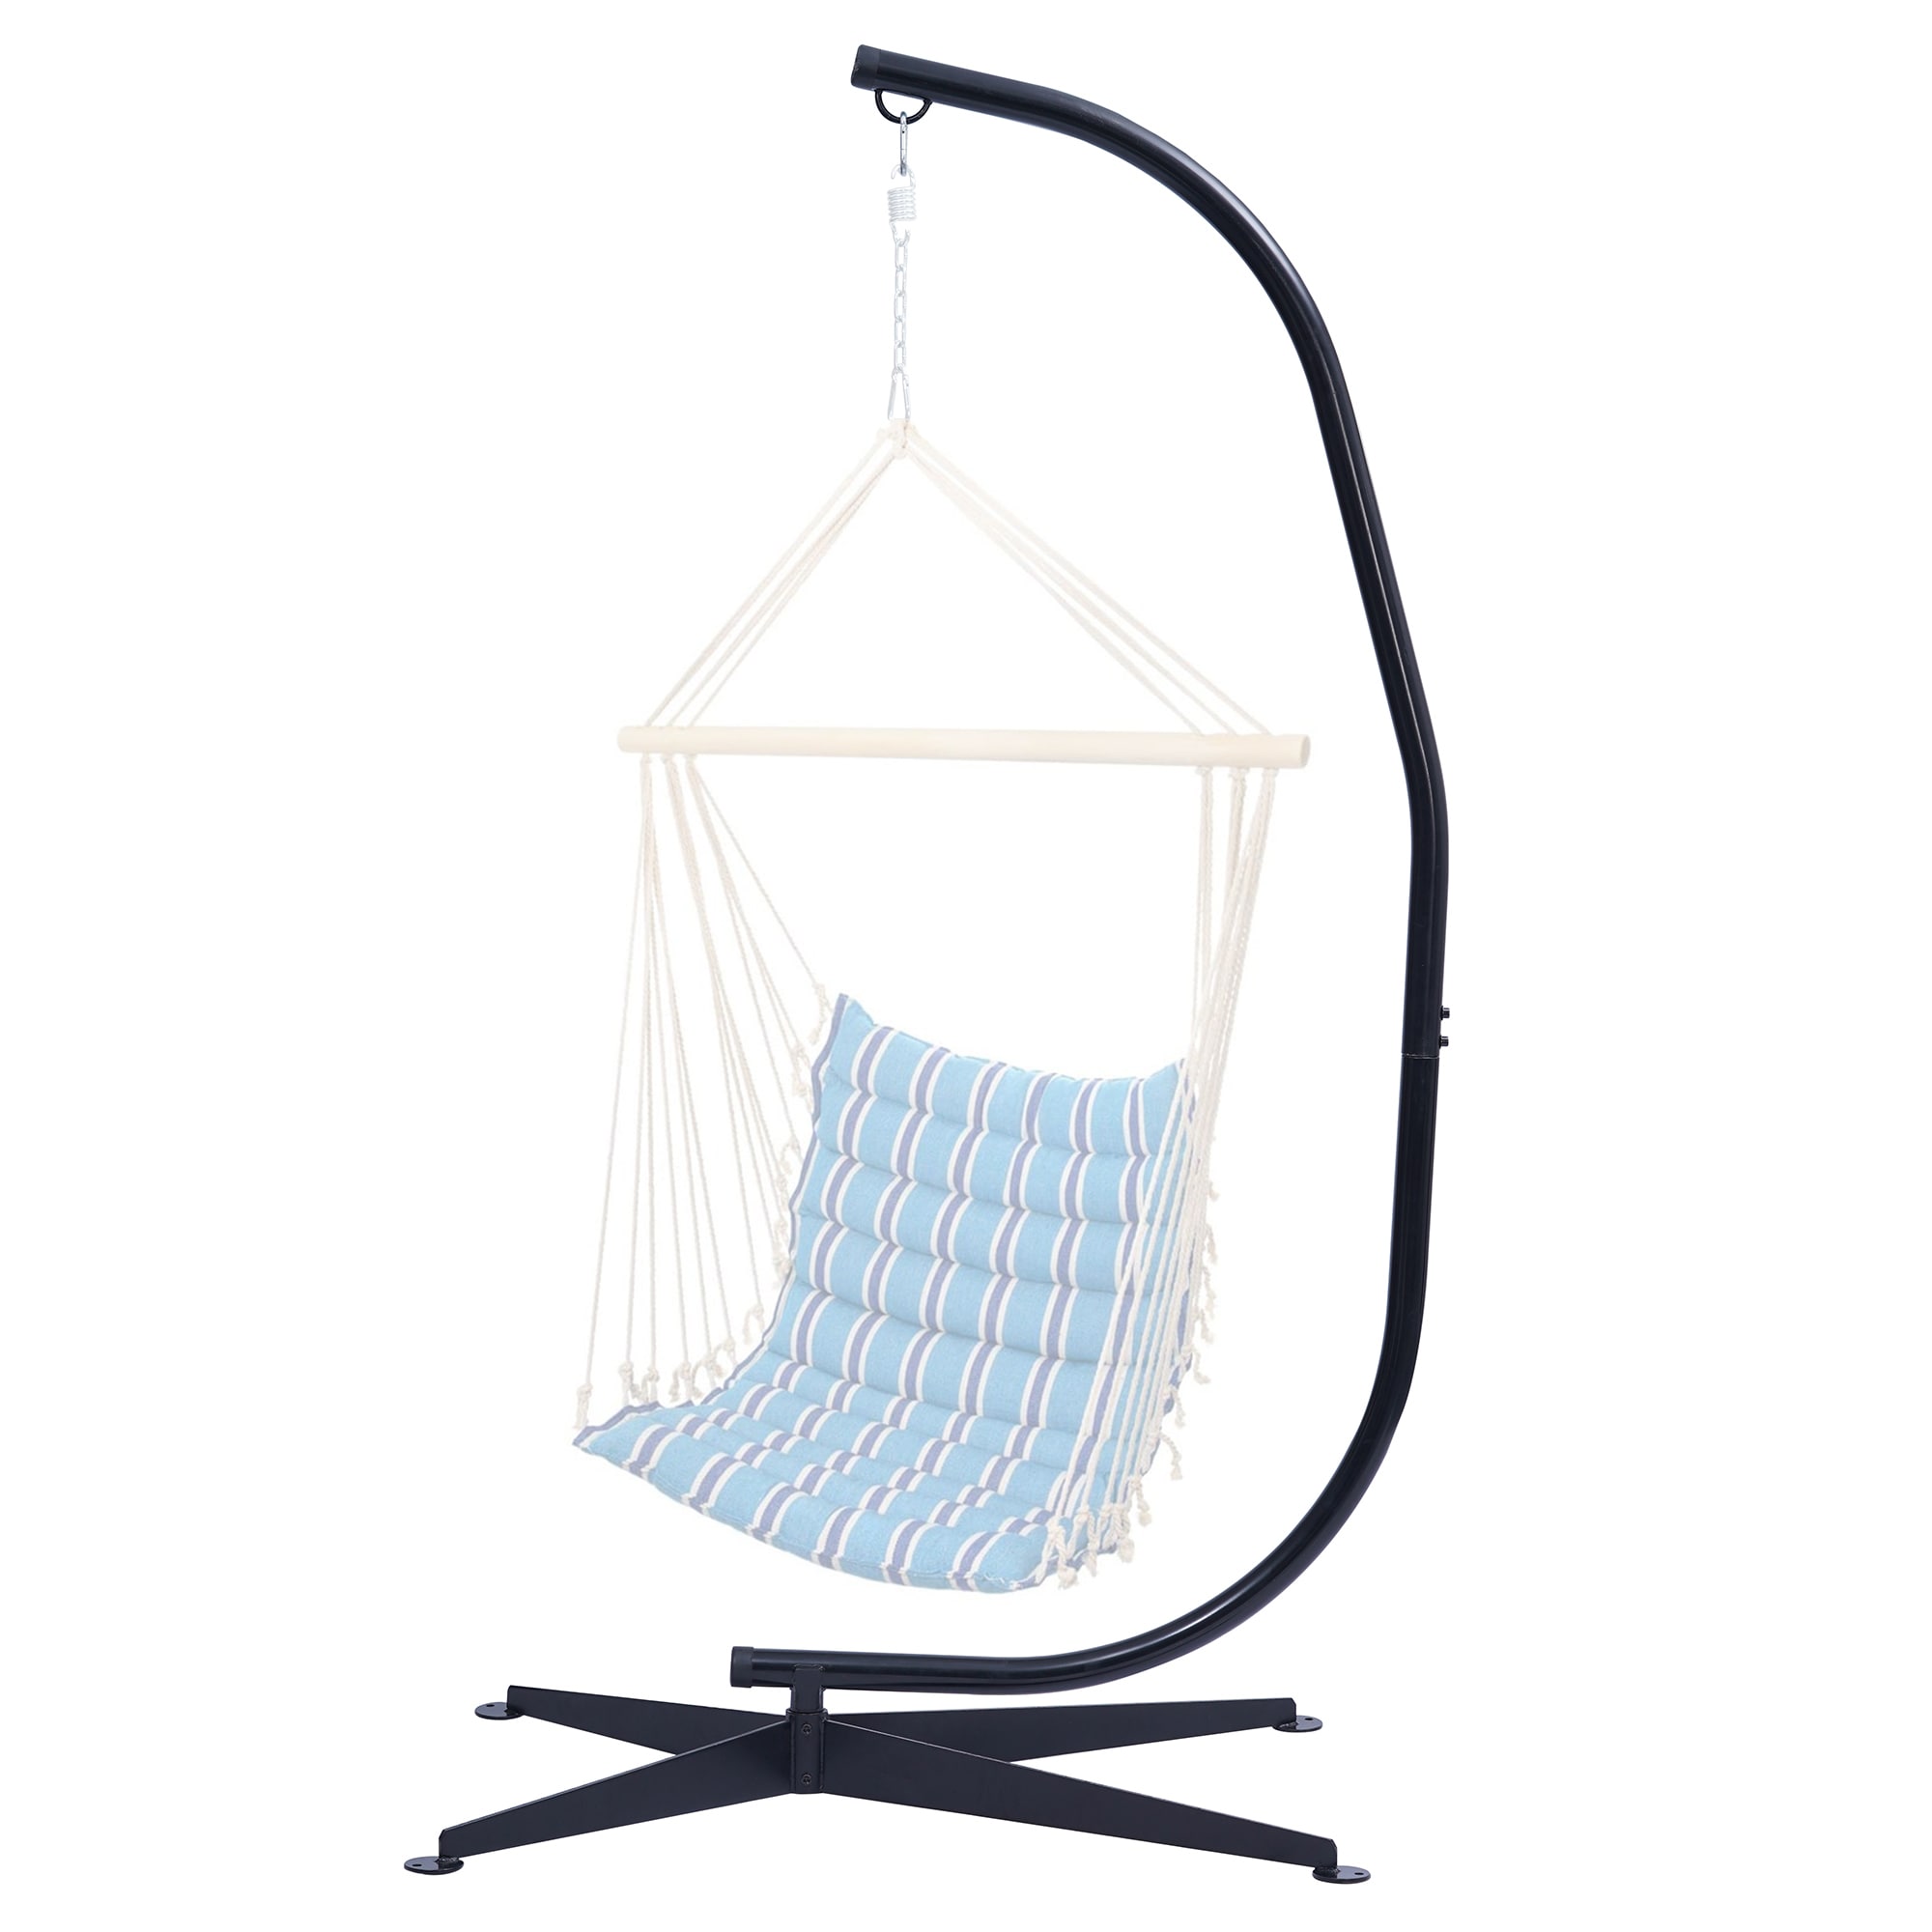 Hammock Indoor Outdoor Fabric Swinging Hanging Air Chair Iron Frame Stand Set 